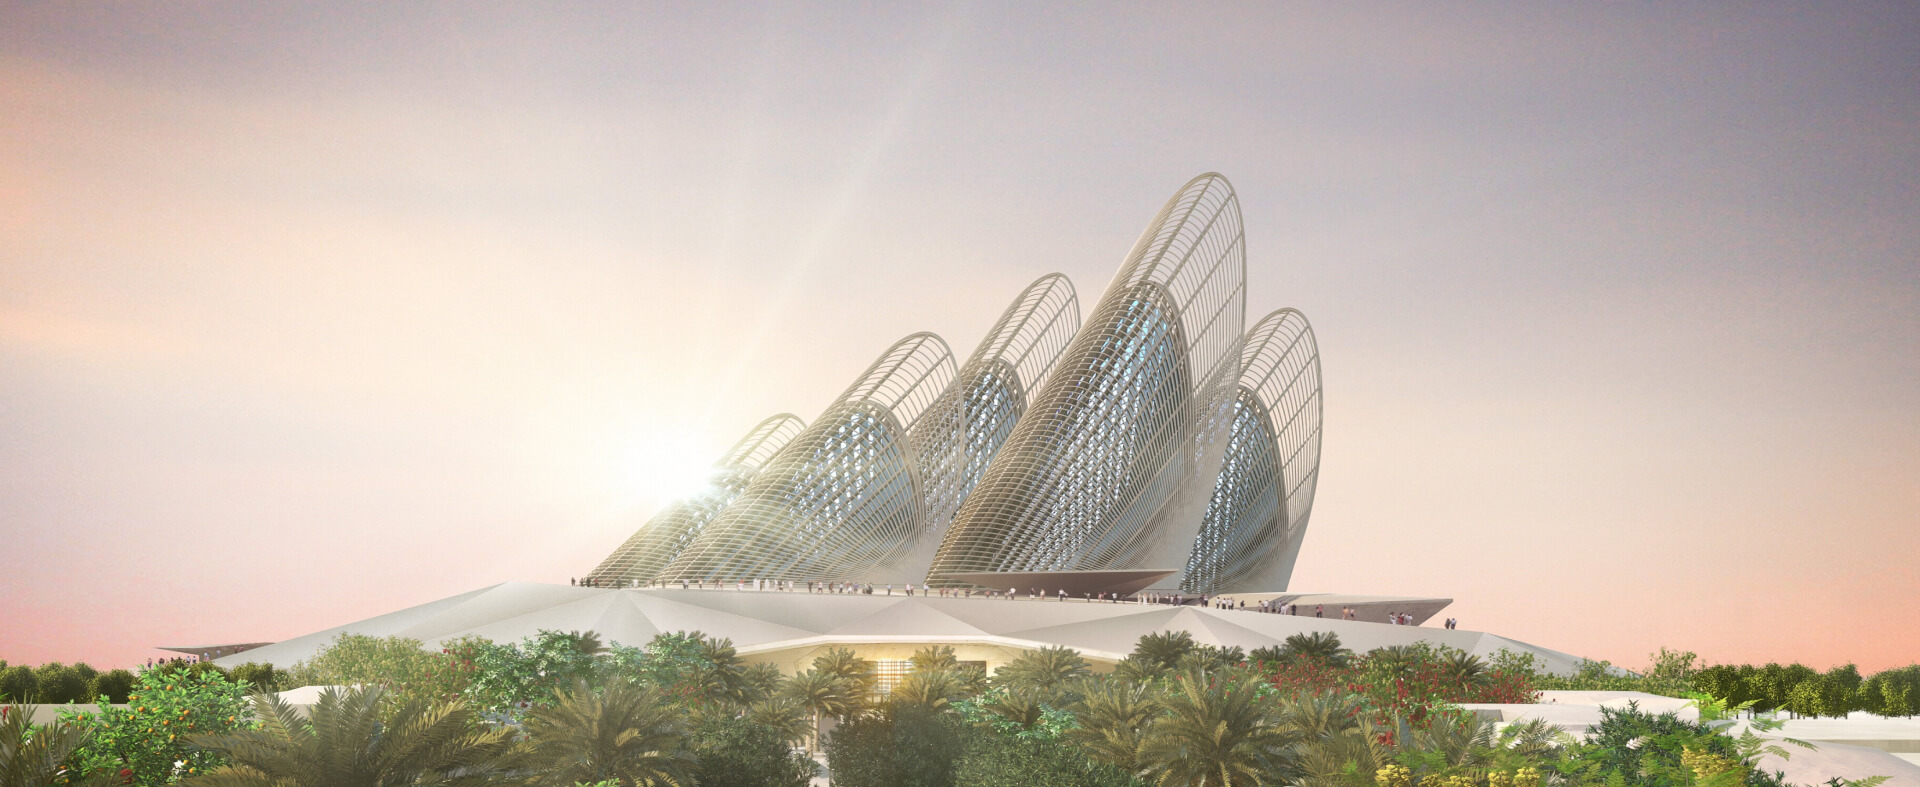 A render of Zayed National Museum at sunset.